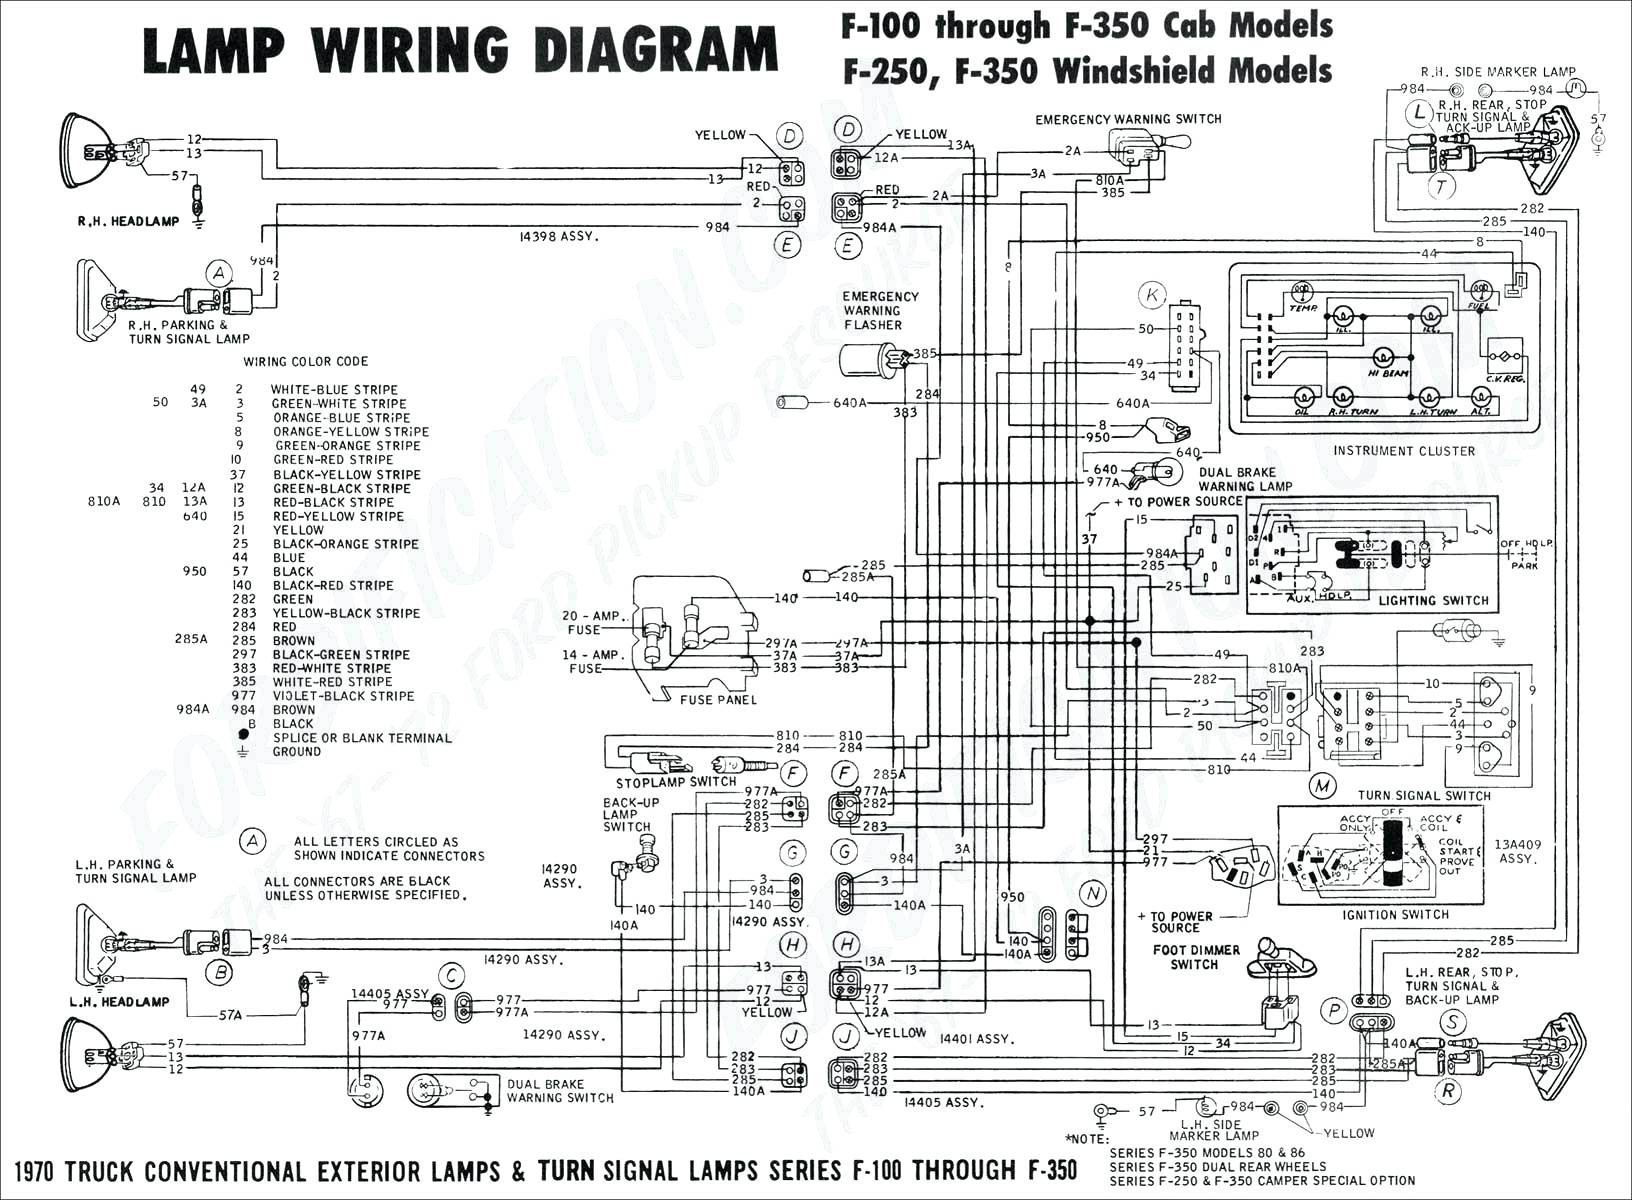 wiring diagram switch to plug save coachmen wiring diagrams lovely rh yourproducthere co RV Battery Isolator Wiring Diagram RV Shore Power Wiring Diagram